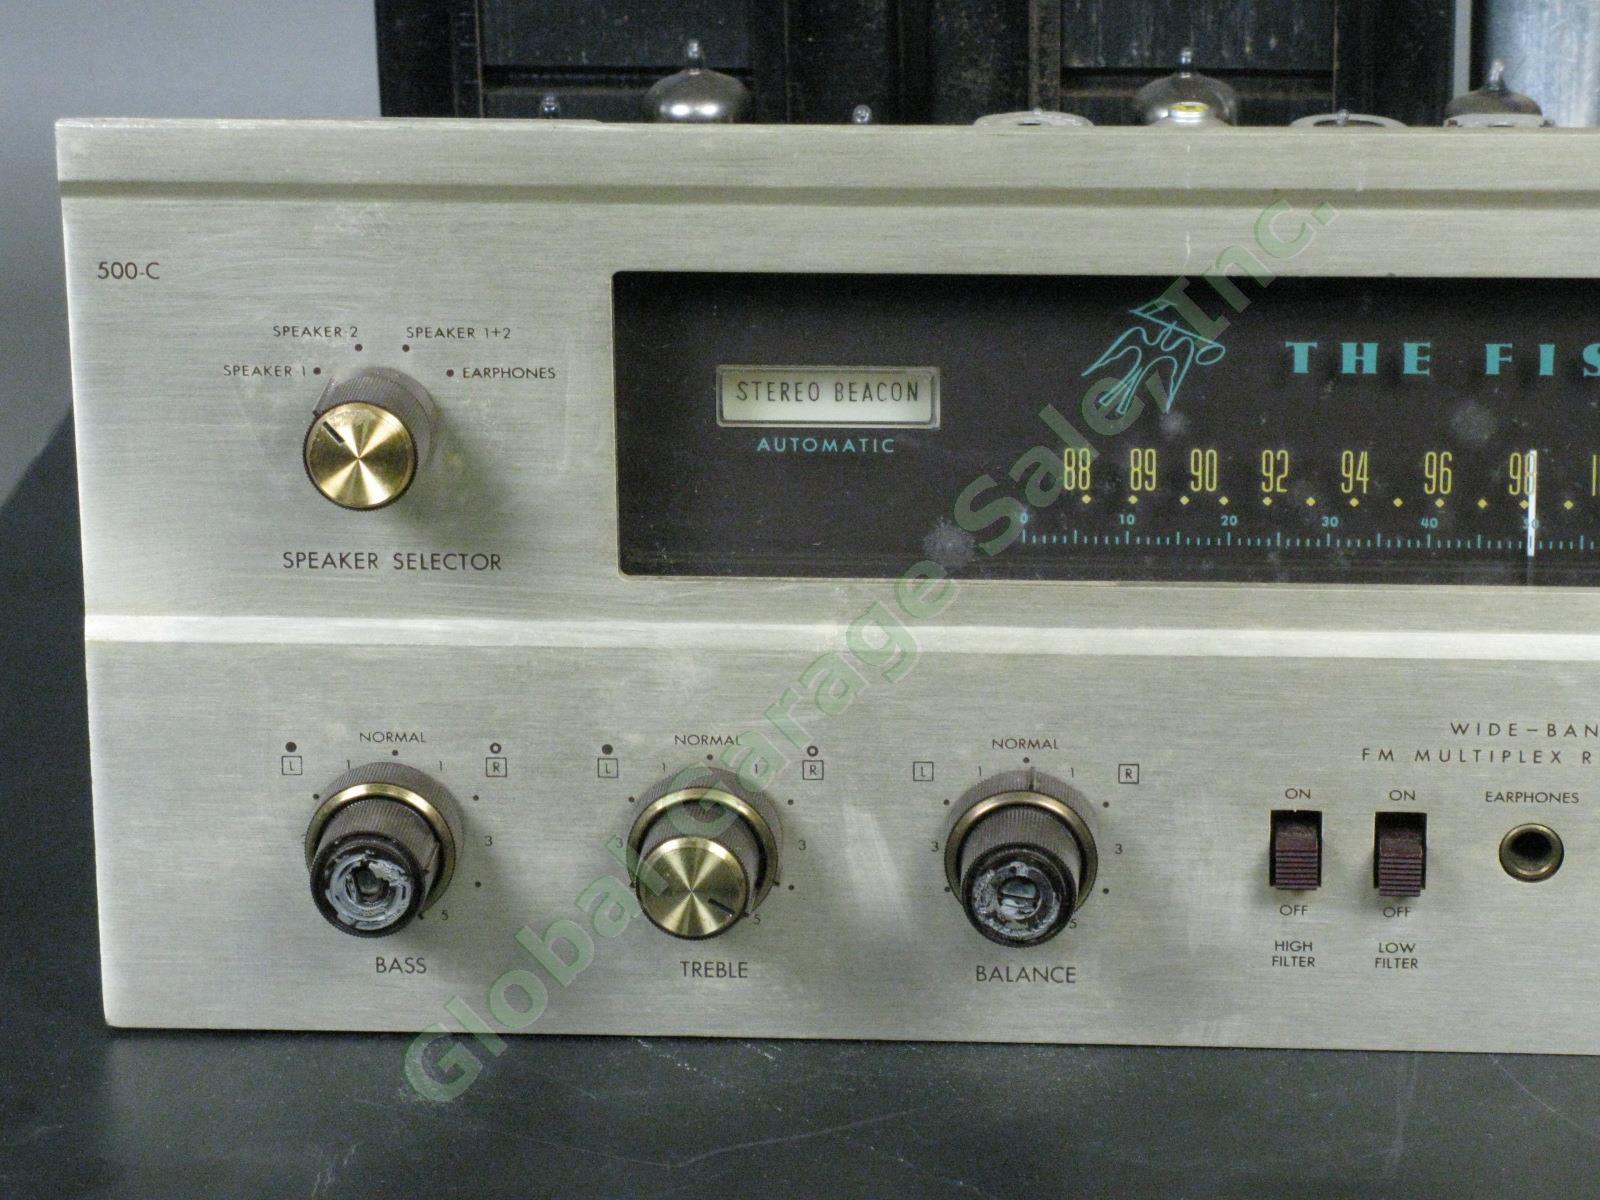 VTG Fisher 500-C Stereophonic FM Multiplex Tube Stereo Receiver Good Working Con 1